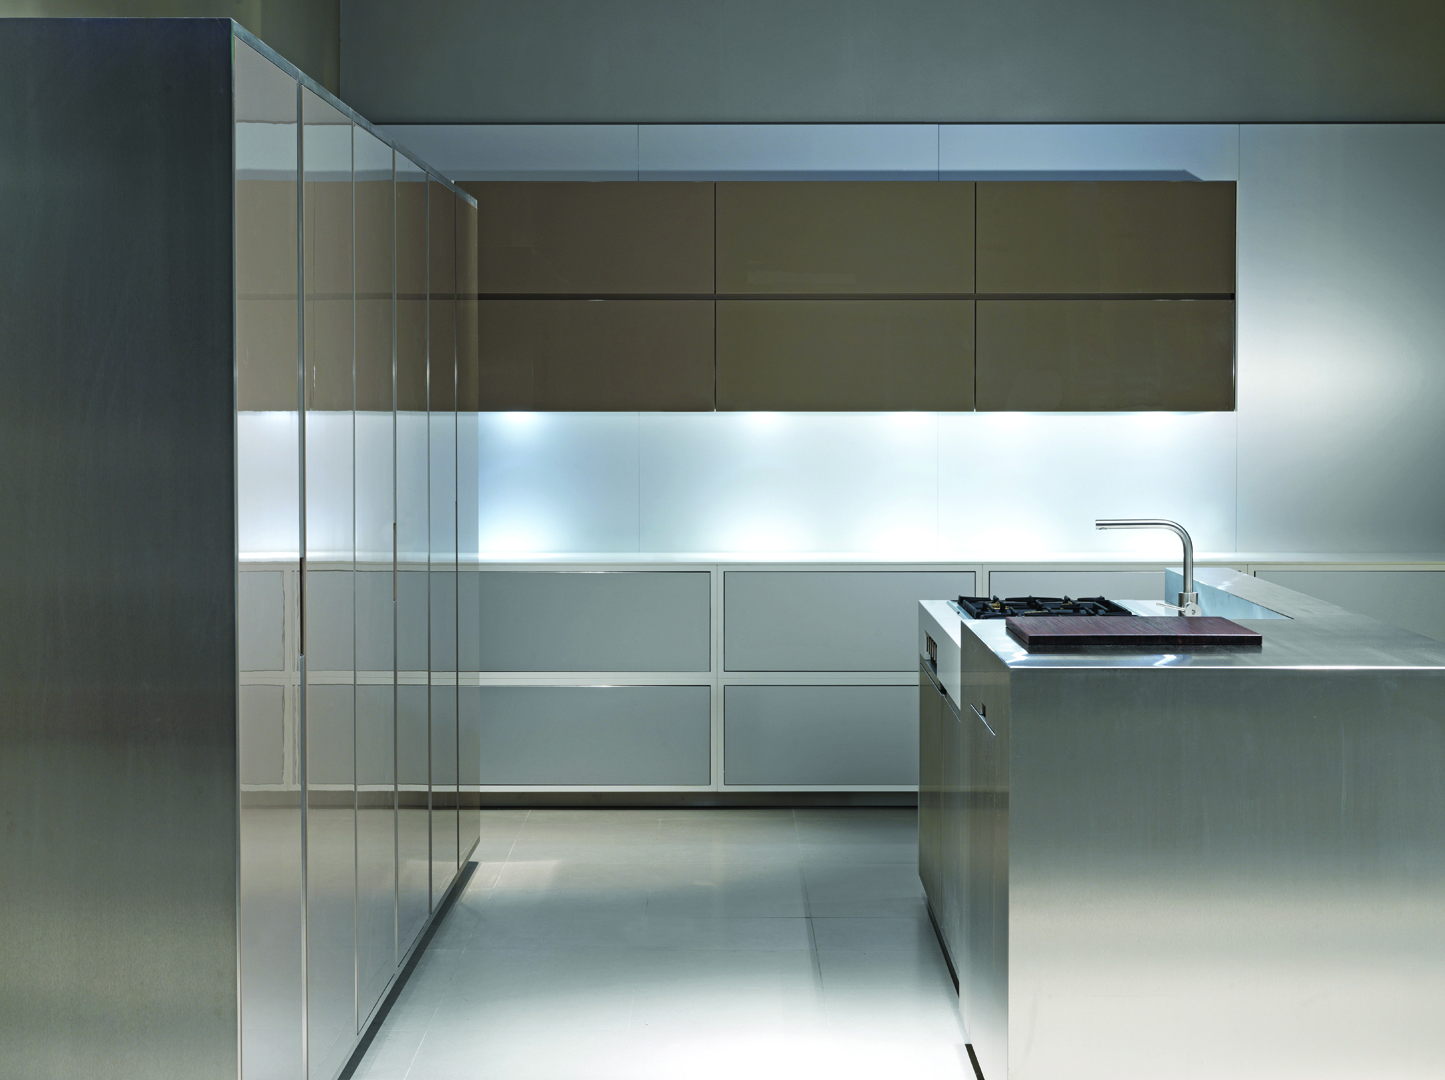 Strato_design_20.10_bespoke-kitchen-project-in-Milano_mat-stainless-steel_hig-gloss-lacquer-Tortora-colour_04